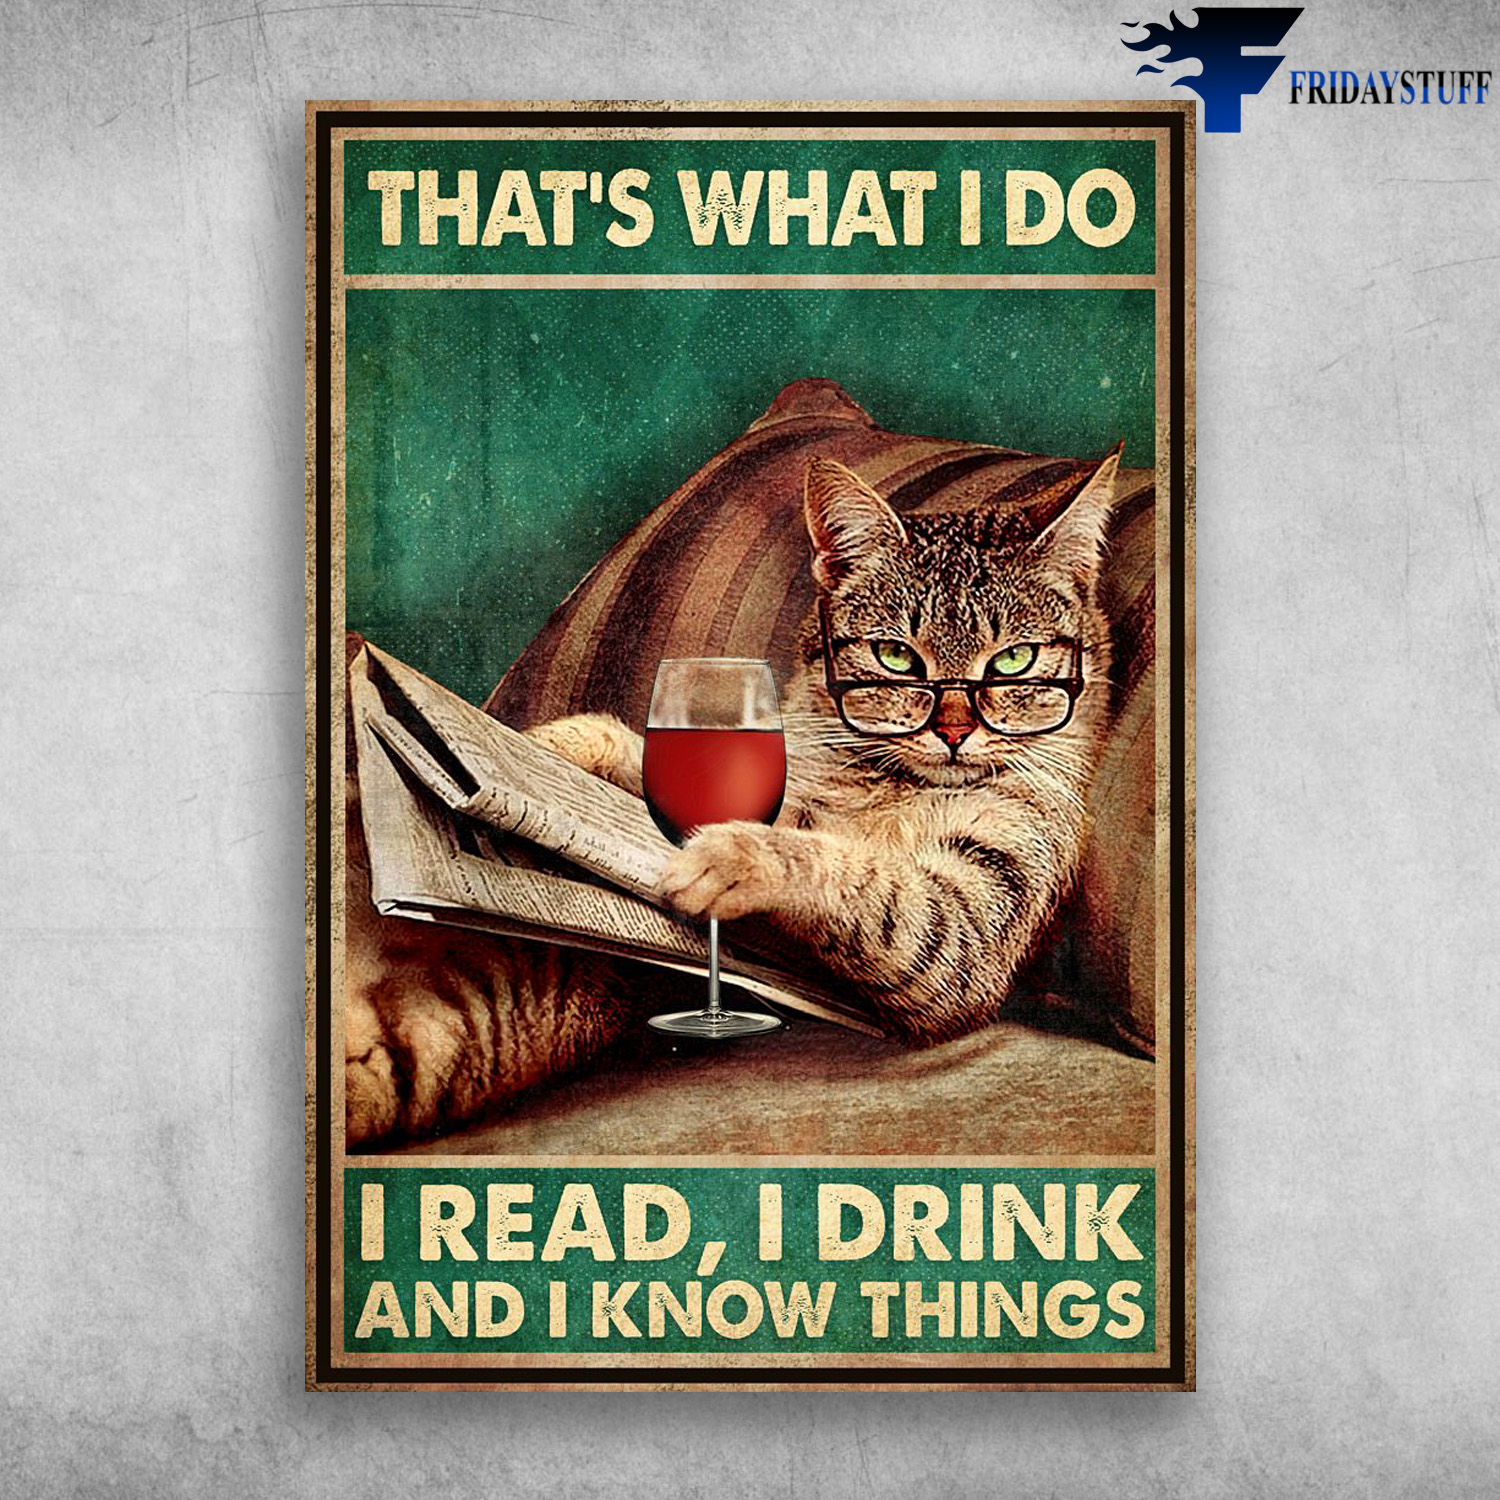 Cat Reads News, Drinks Wine - That's What I Do, I Read, I Drink, And I Know Things